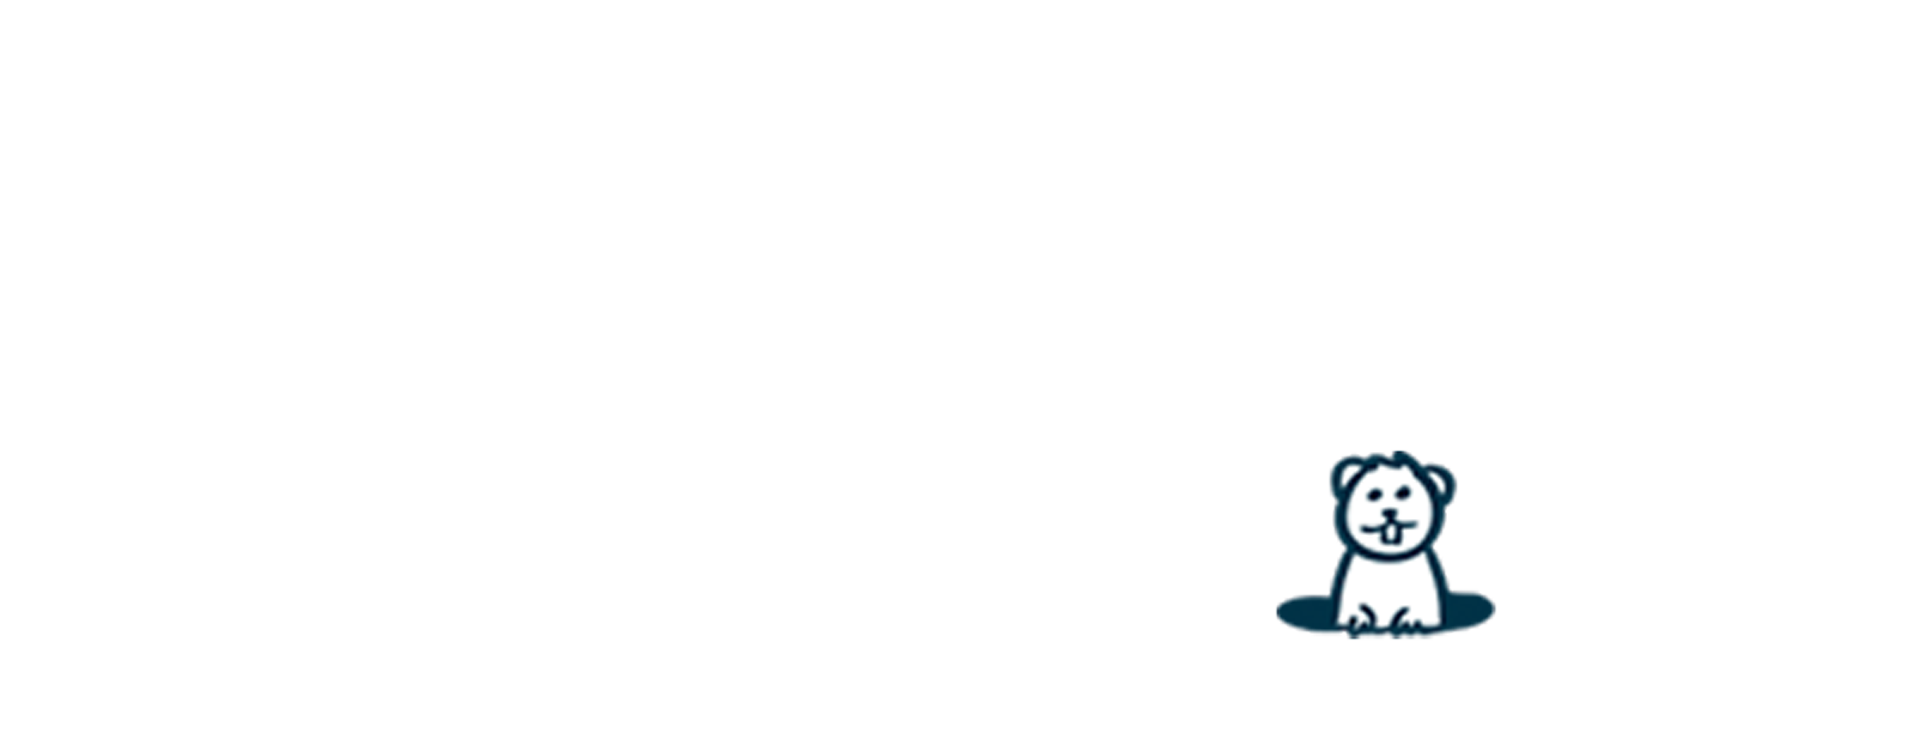 enter state of Phil